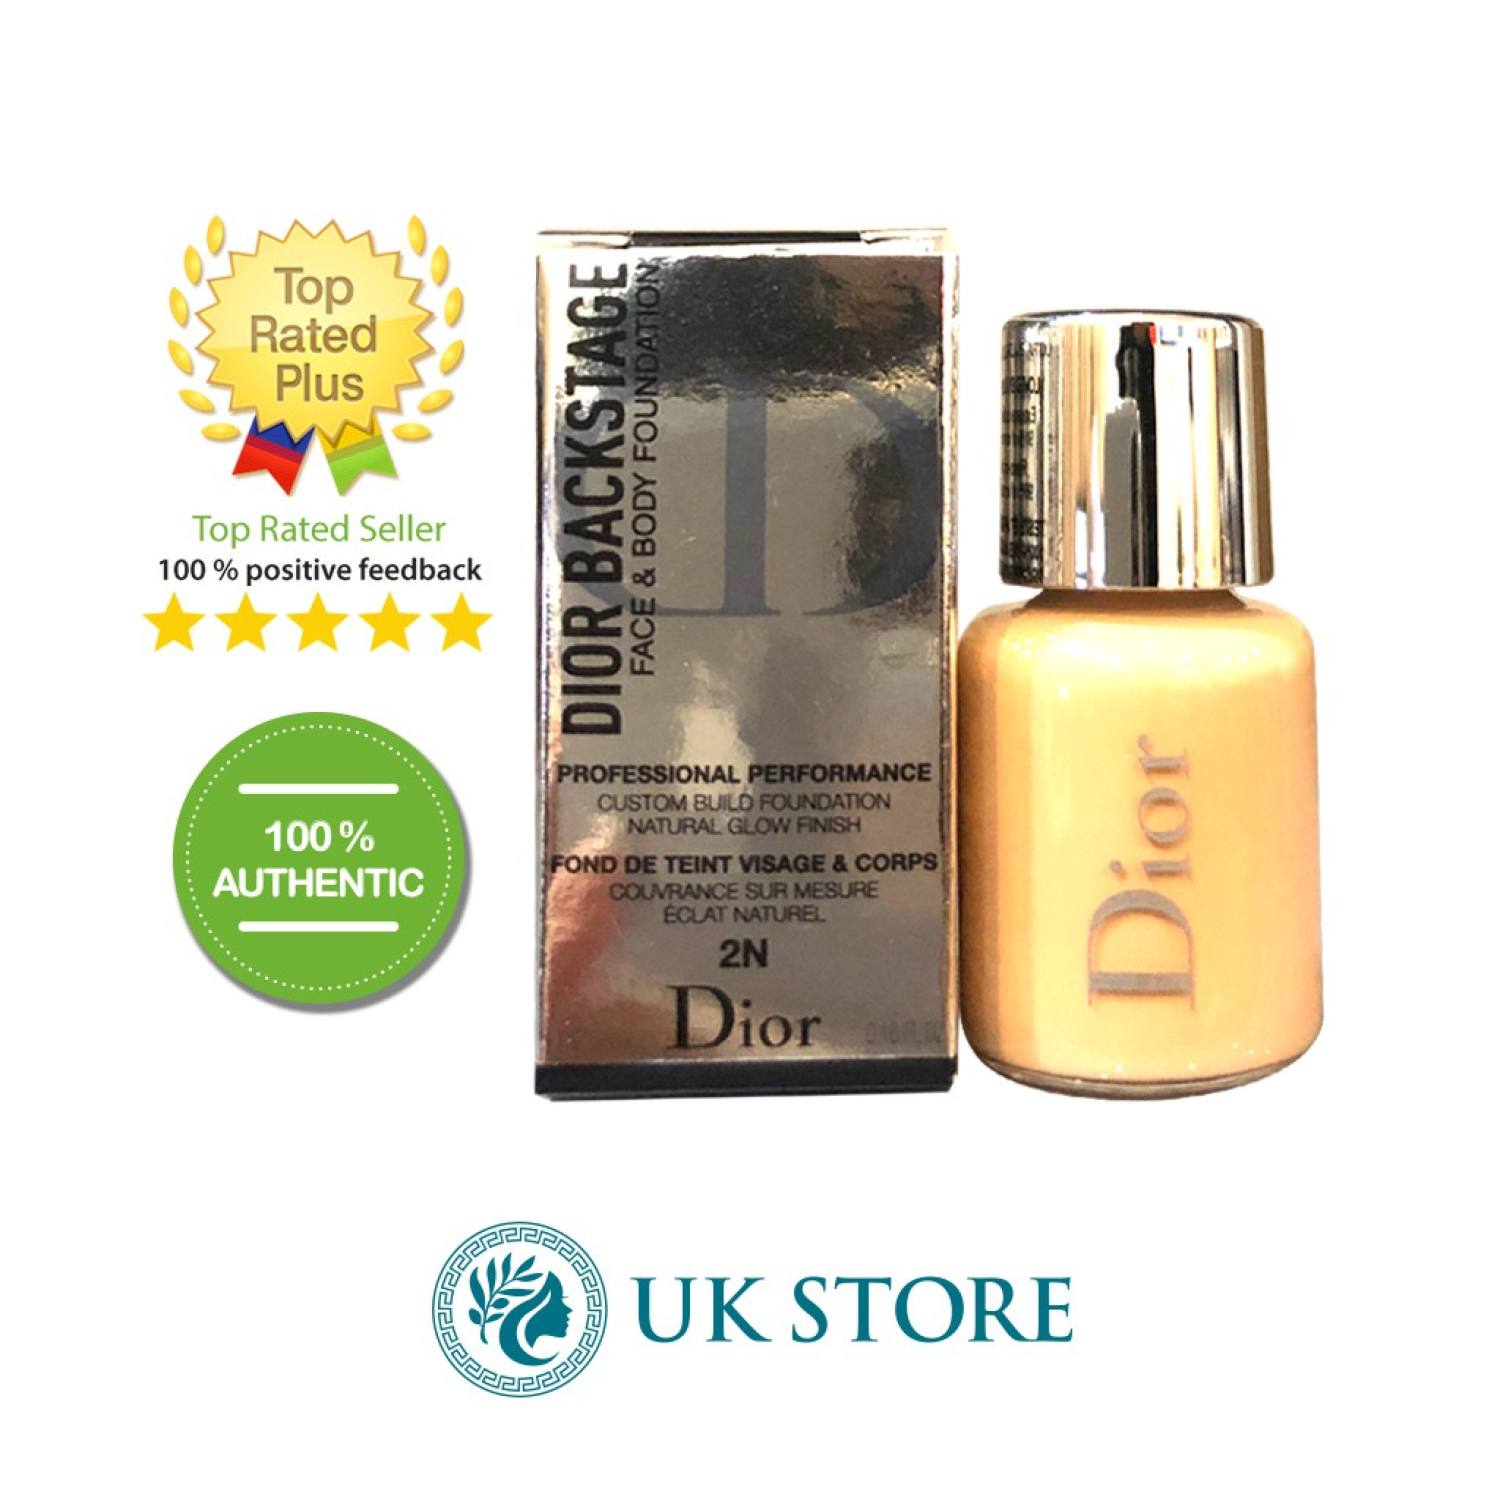 Dior Backstage  Face and Body Foundation  Review Produse Cosmetice